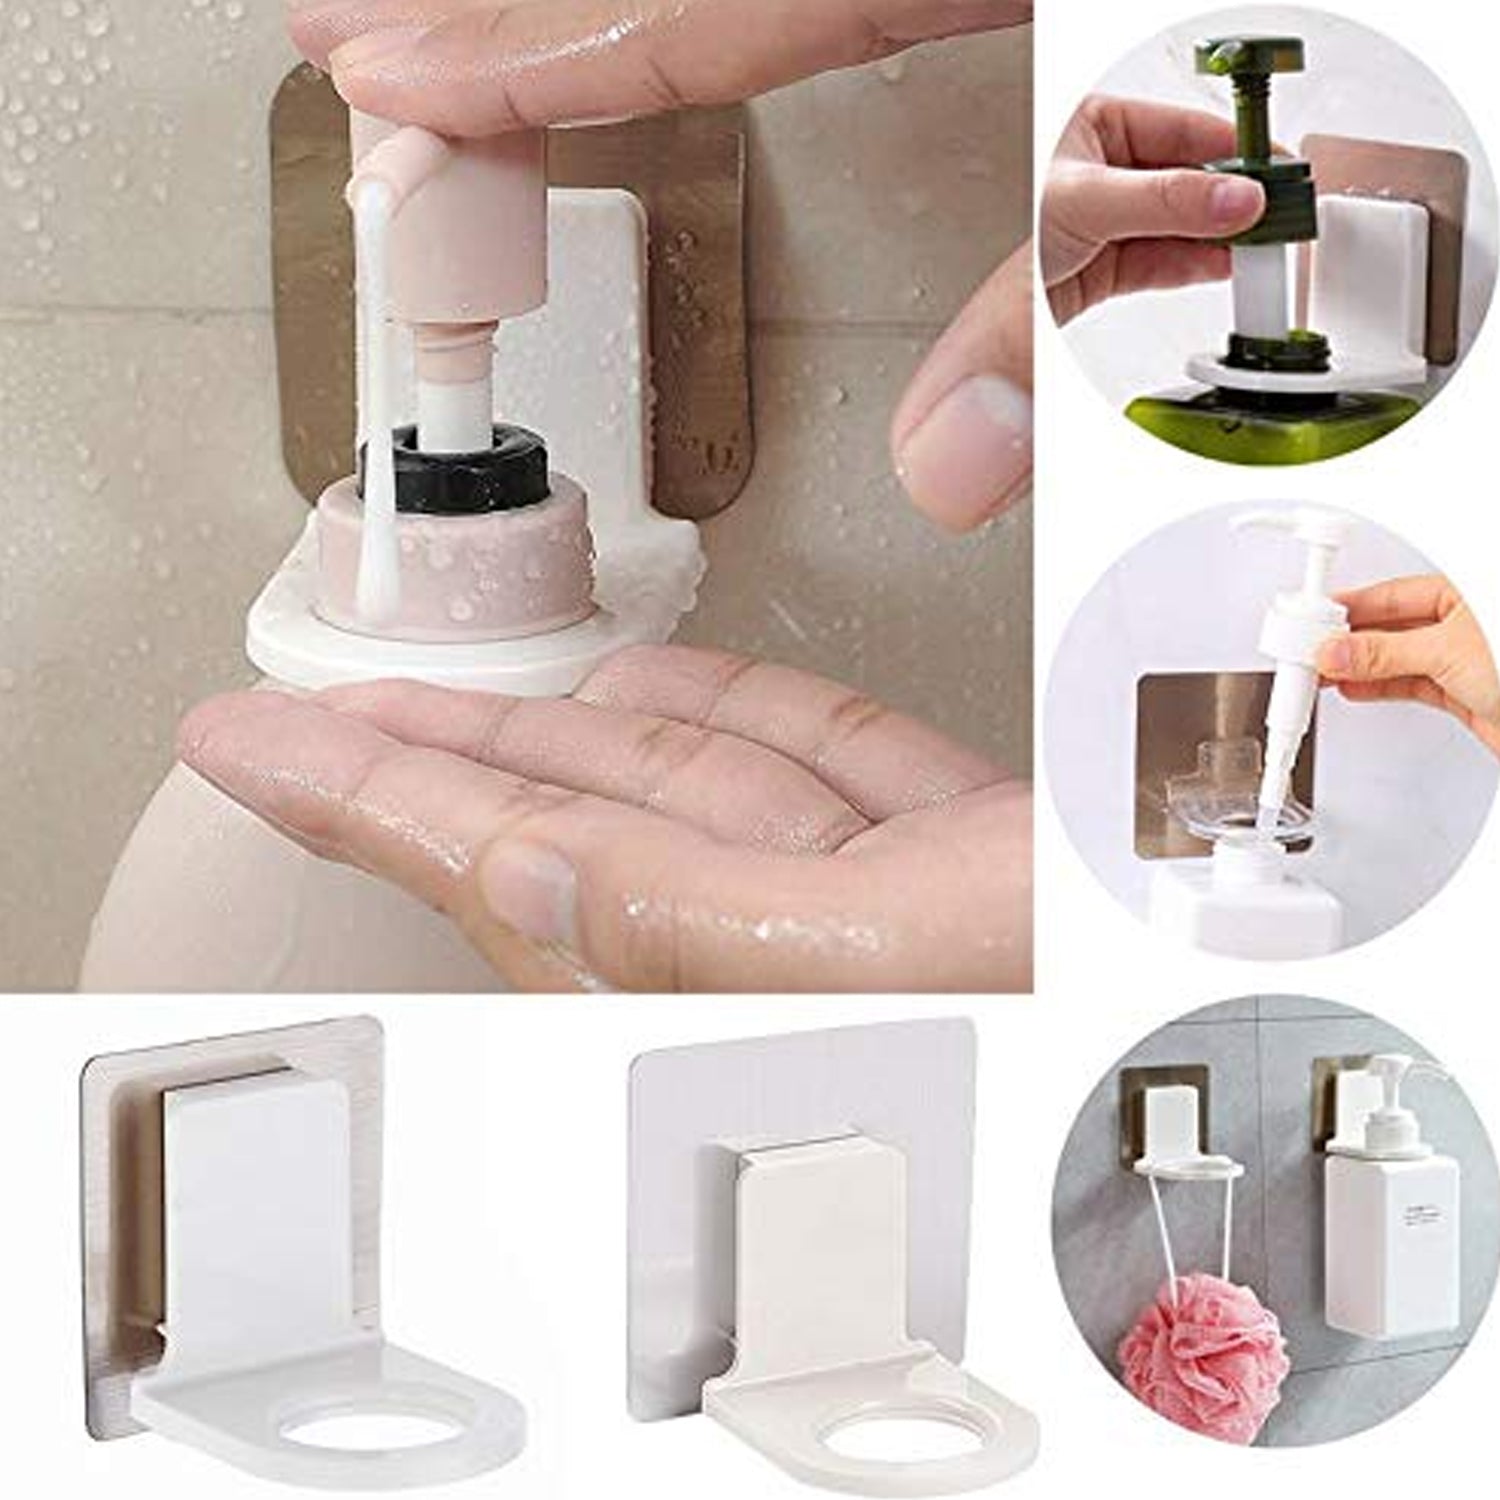 1158 Wall Mounted Self Sticky Hooks for Body Wash Shampoo Bottle Wall Storage Strong Adhesive Hook Power Plug Socket Hanger Holder Multi Color (1pc) DeoDap